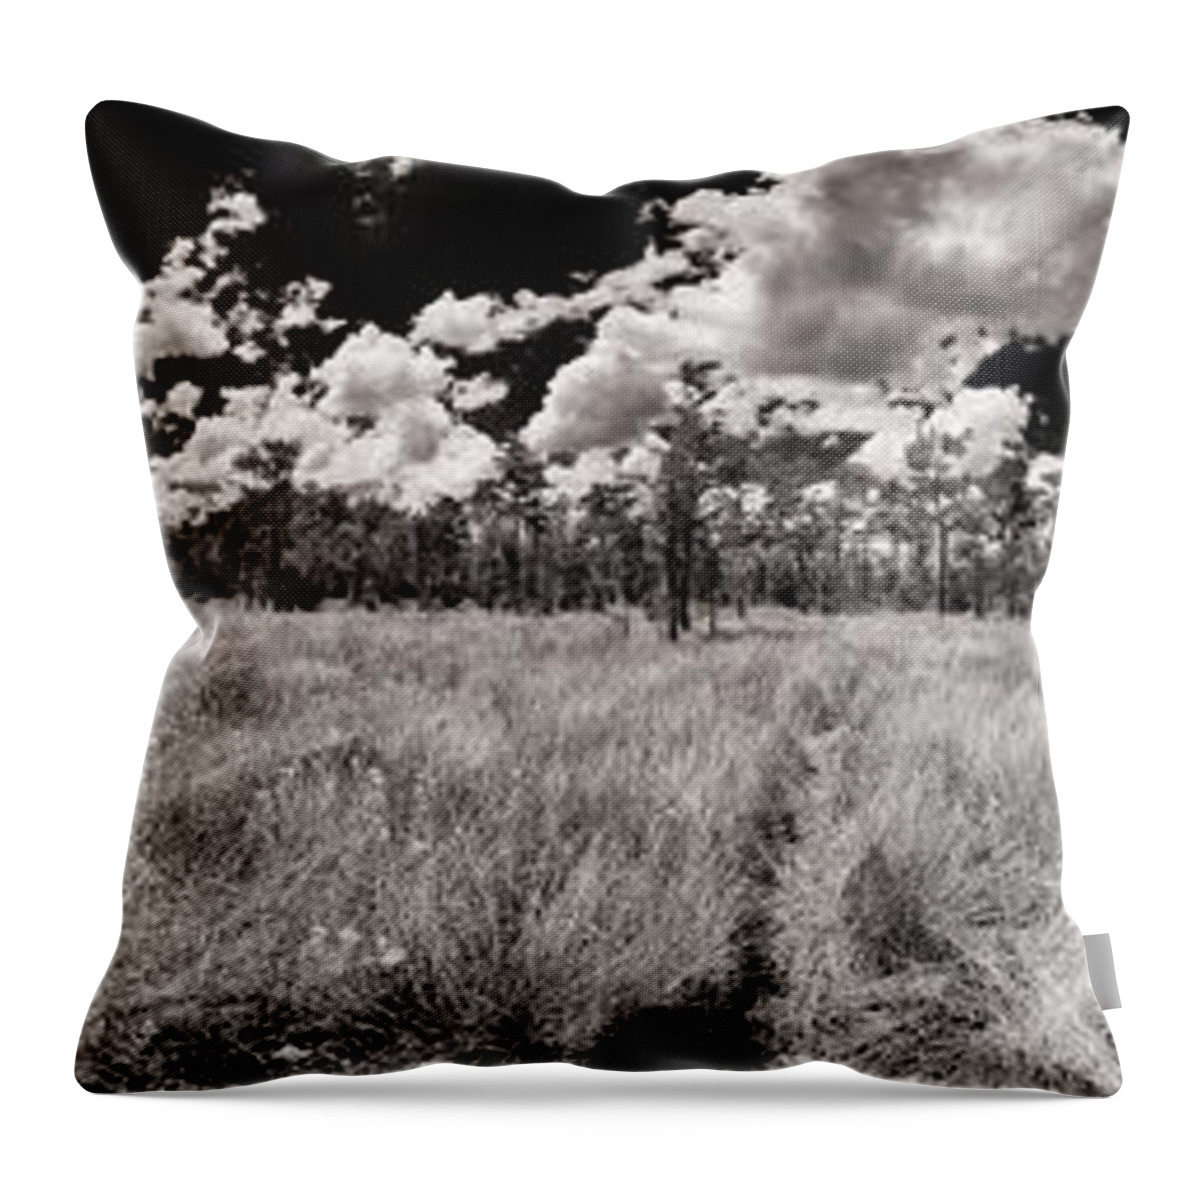 Everglades Throw Pillow featuring the photograph Florida Everglades by Raul Rodriguez